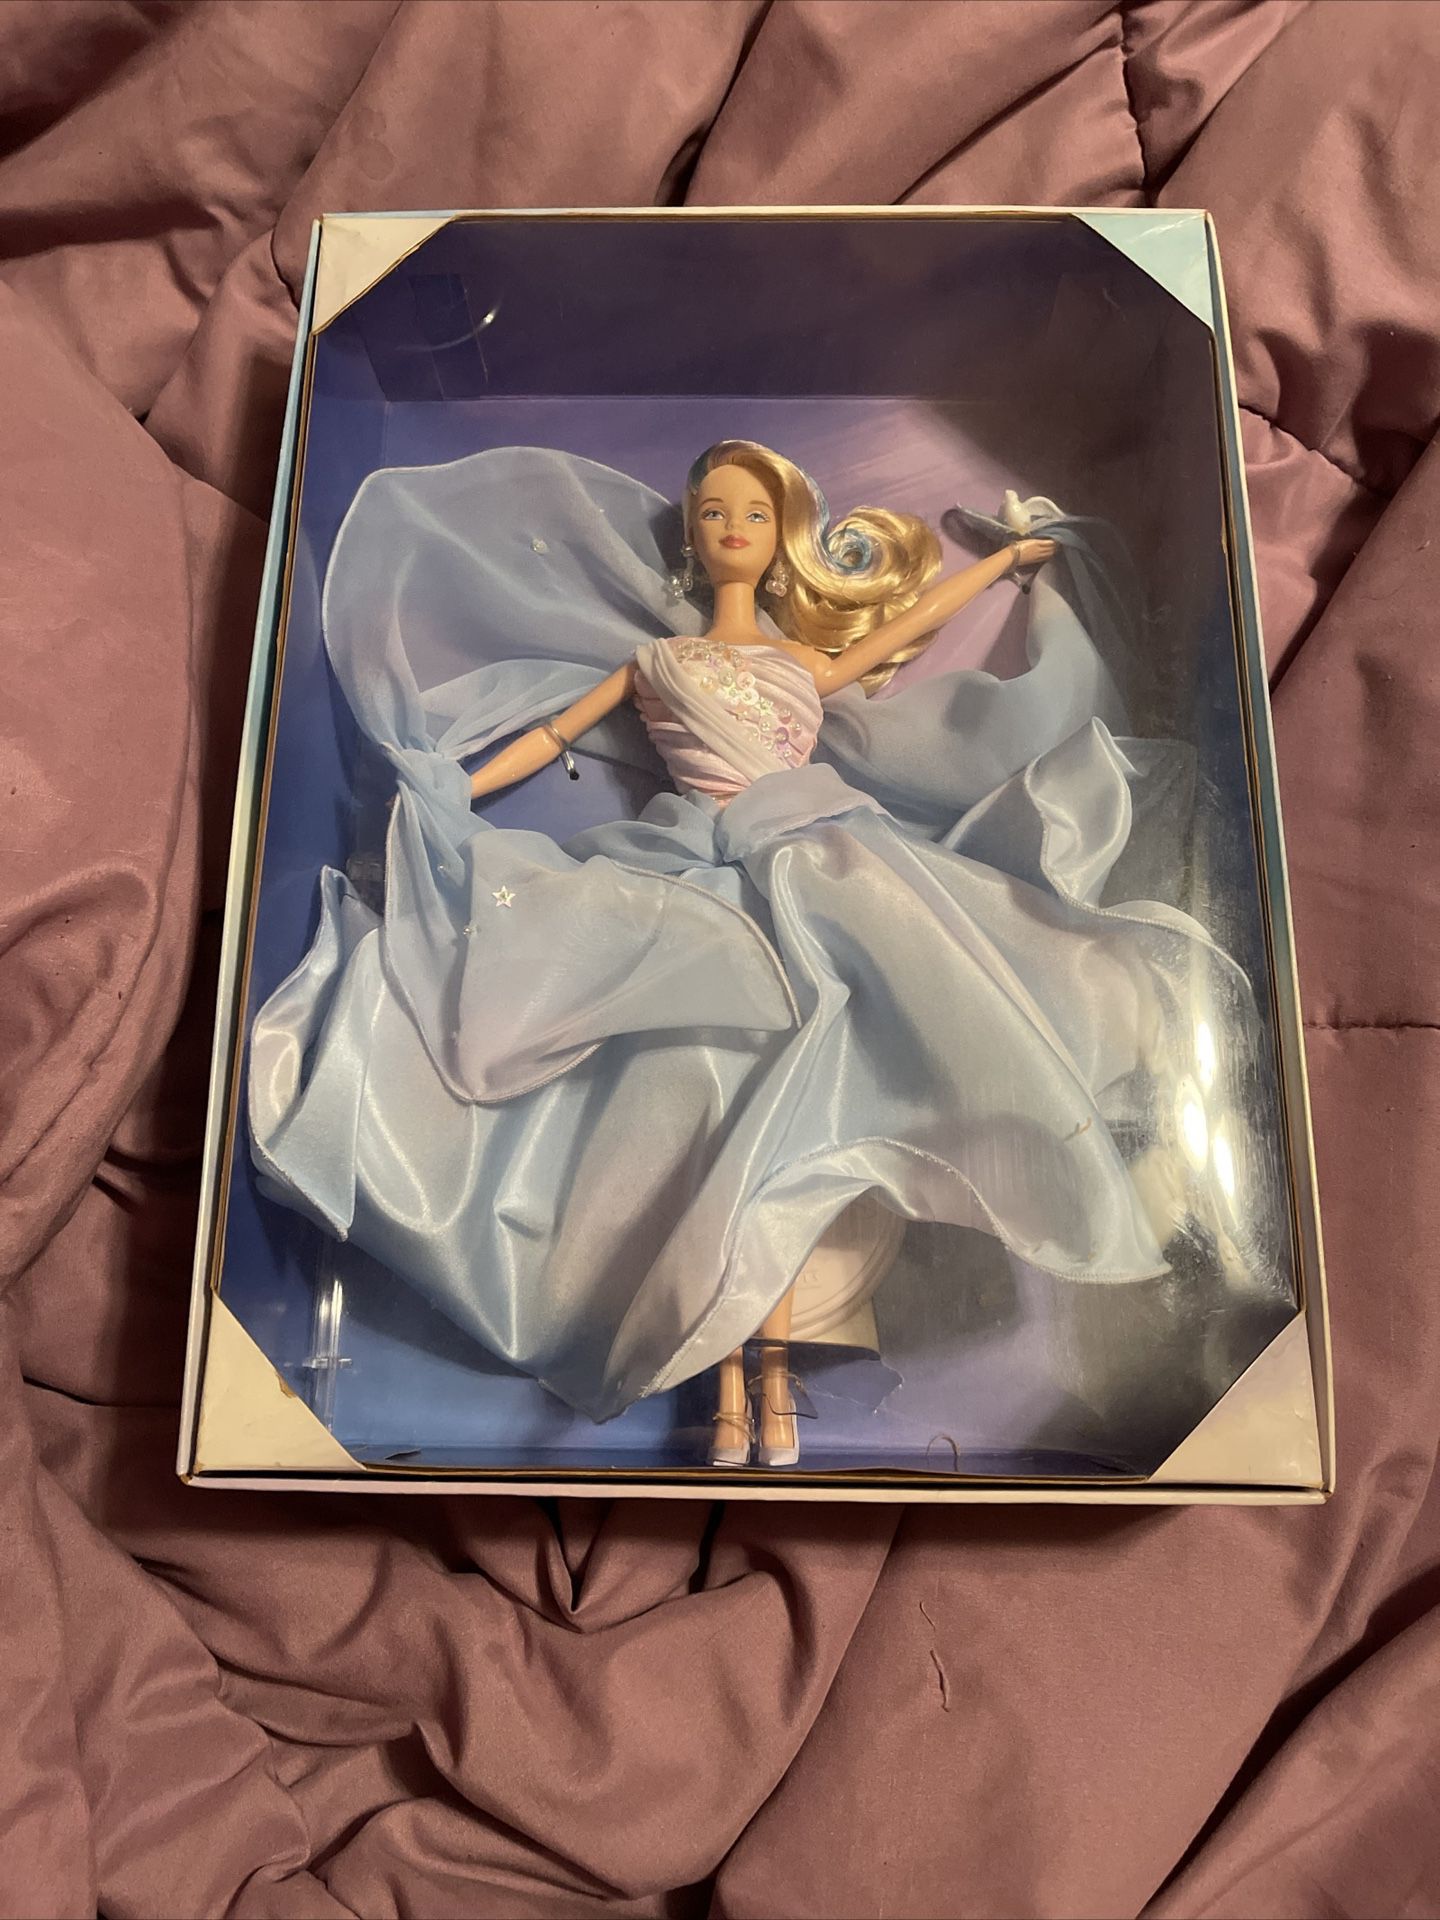 Whispering Wind 1999 Barbie Doll - New, Never Removed From Box